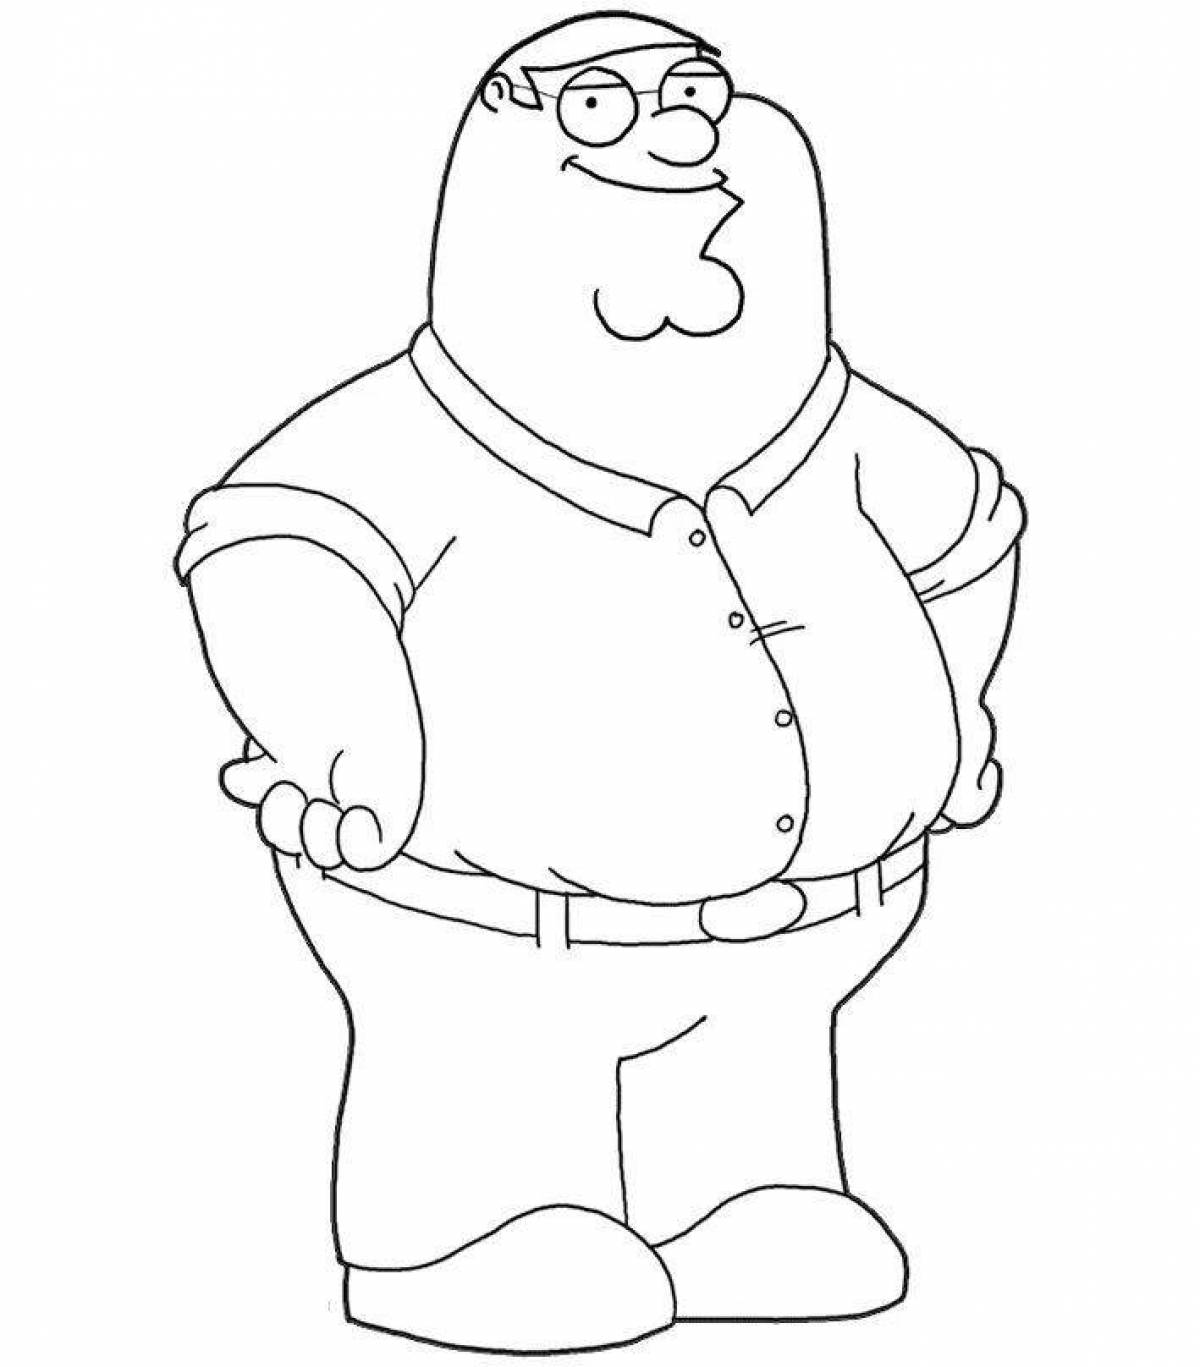 Peter griffin #7